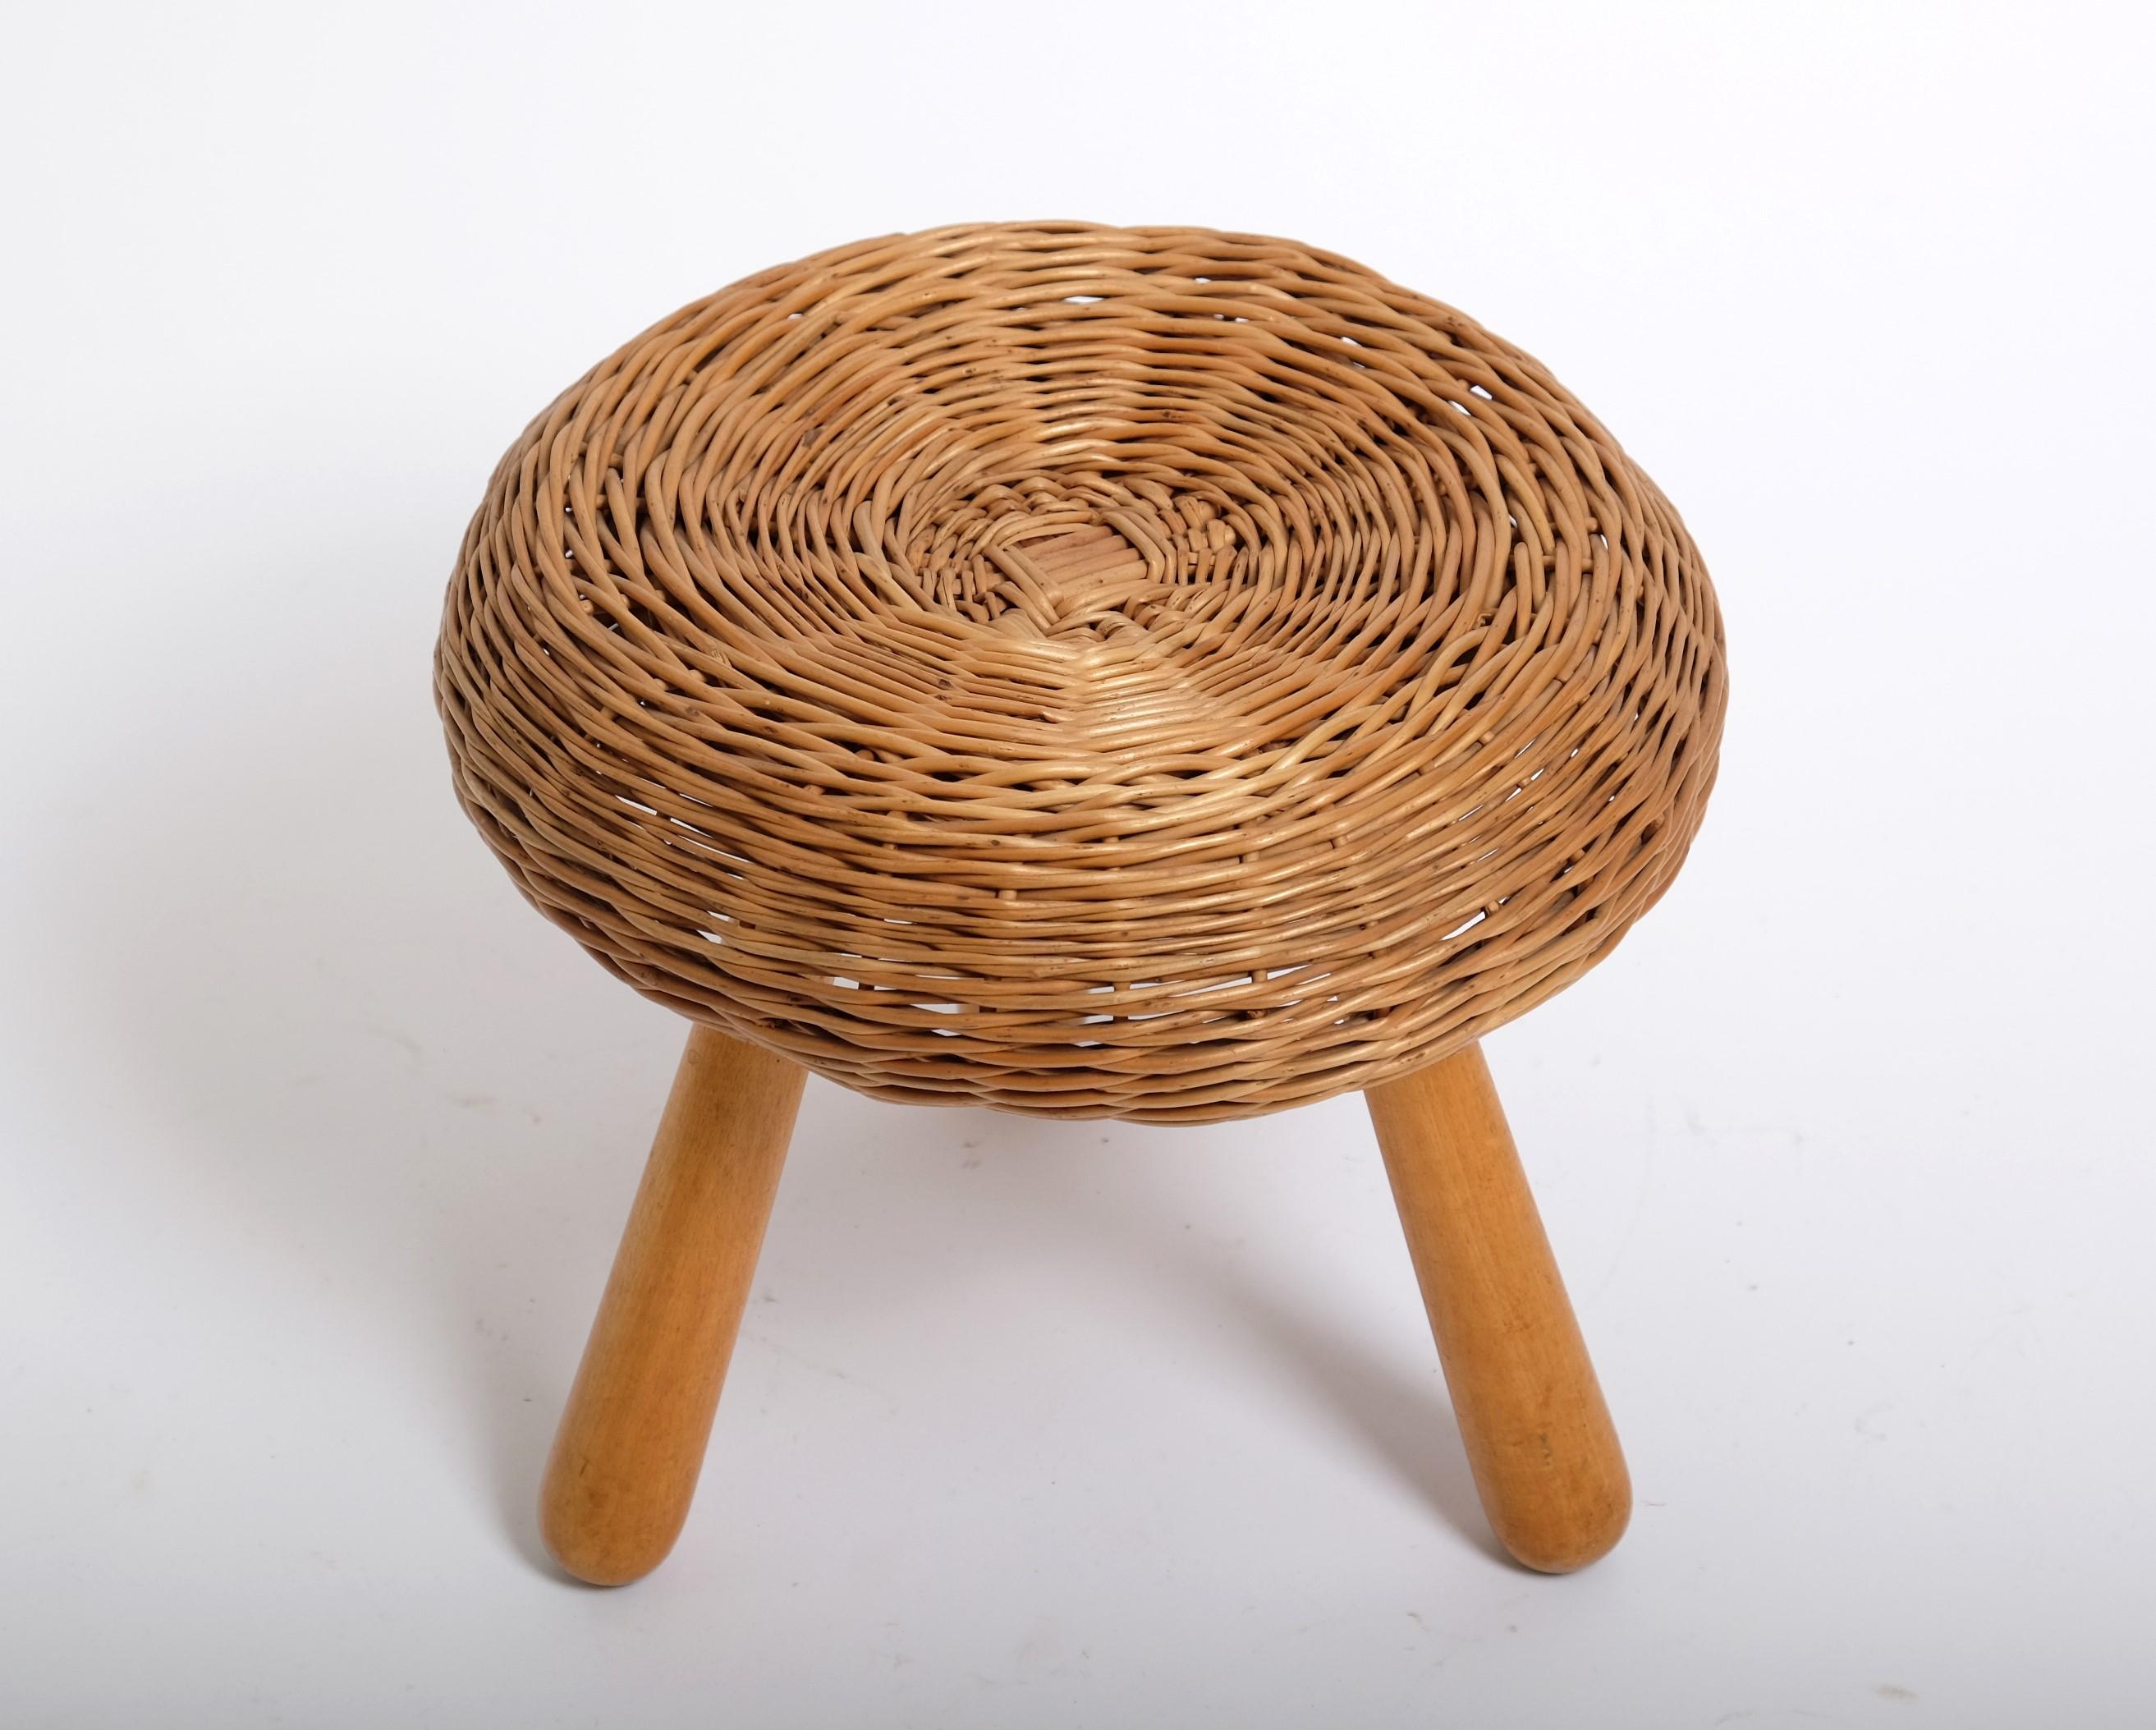 Tony Paul 'Attributed' Stool Wicker Wood, United States 1950s For Sale 1